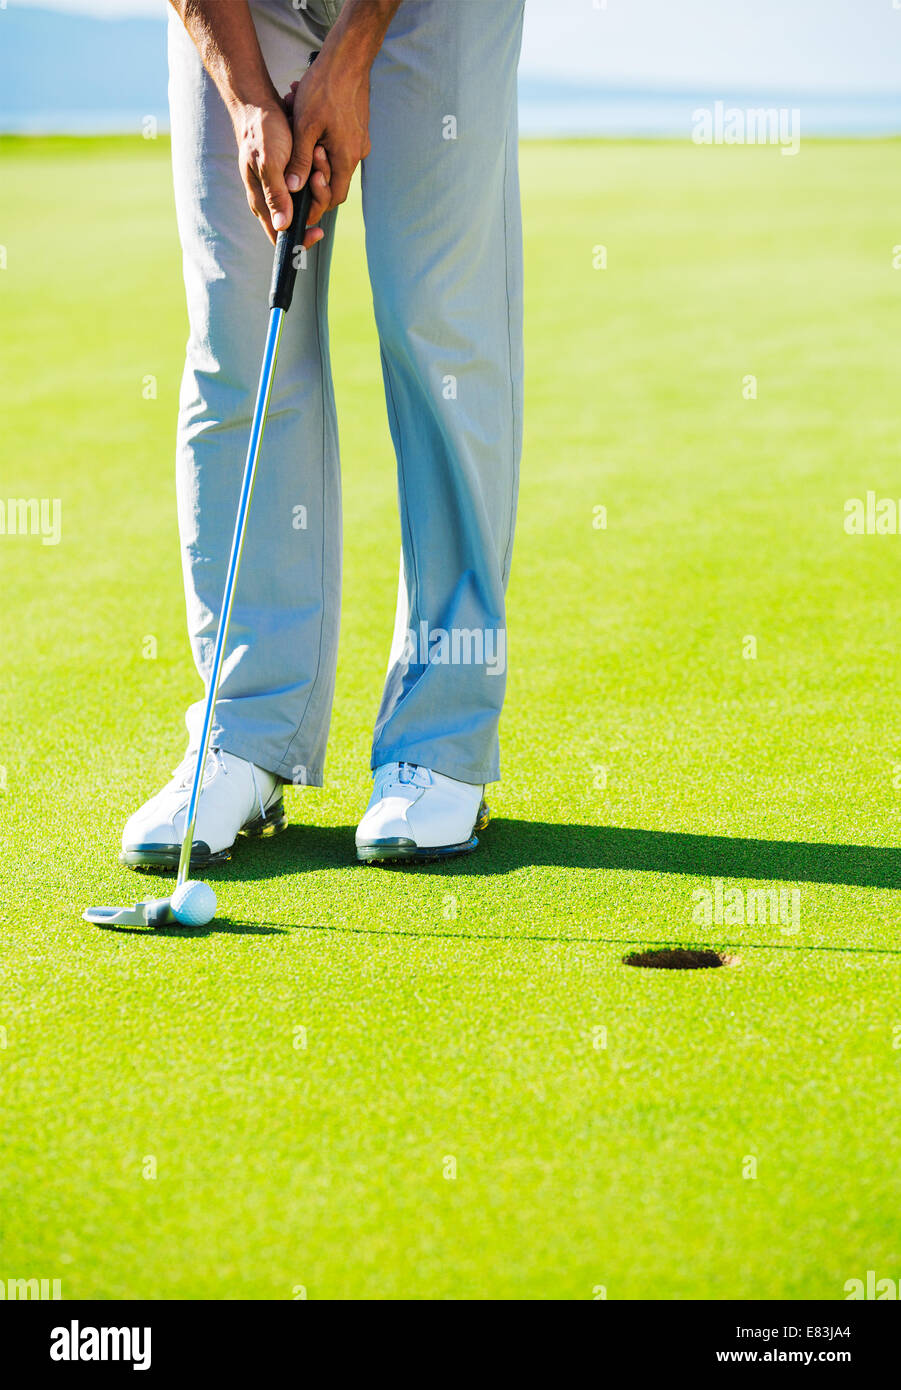 Golfer on Putting Green Hitting Golf Ball into the Hole Stock Photo